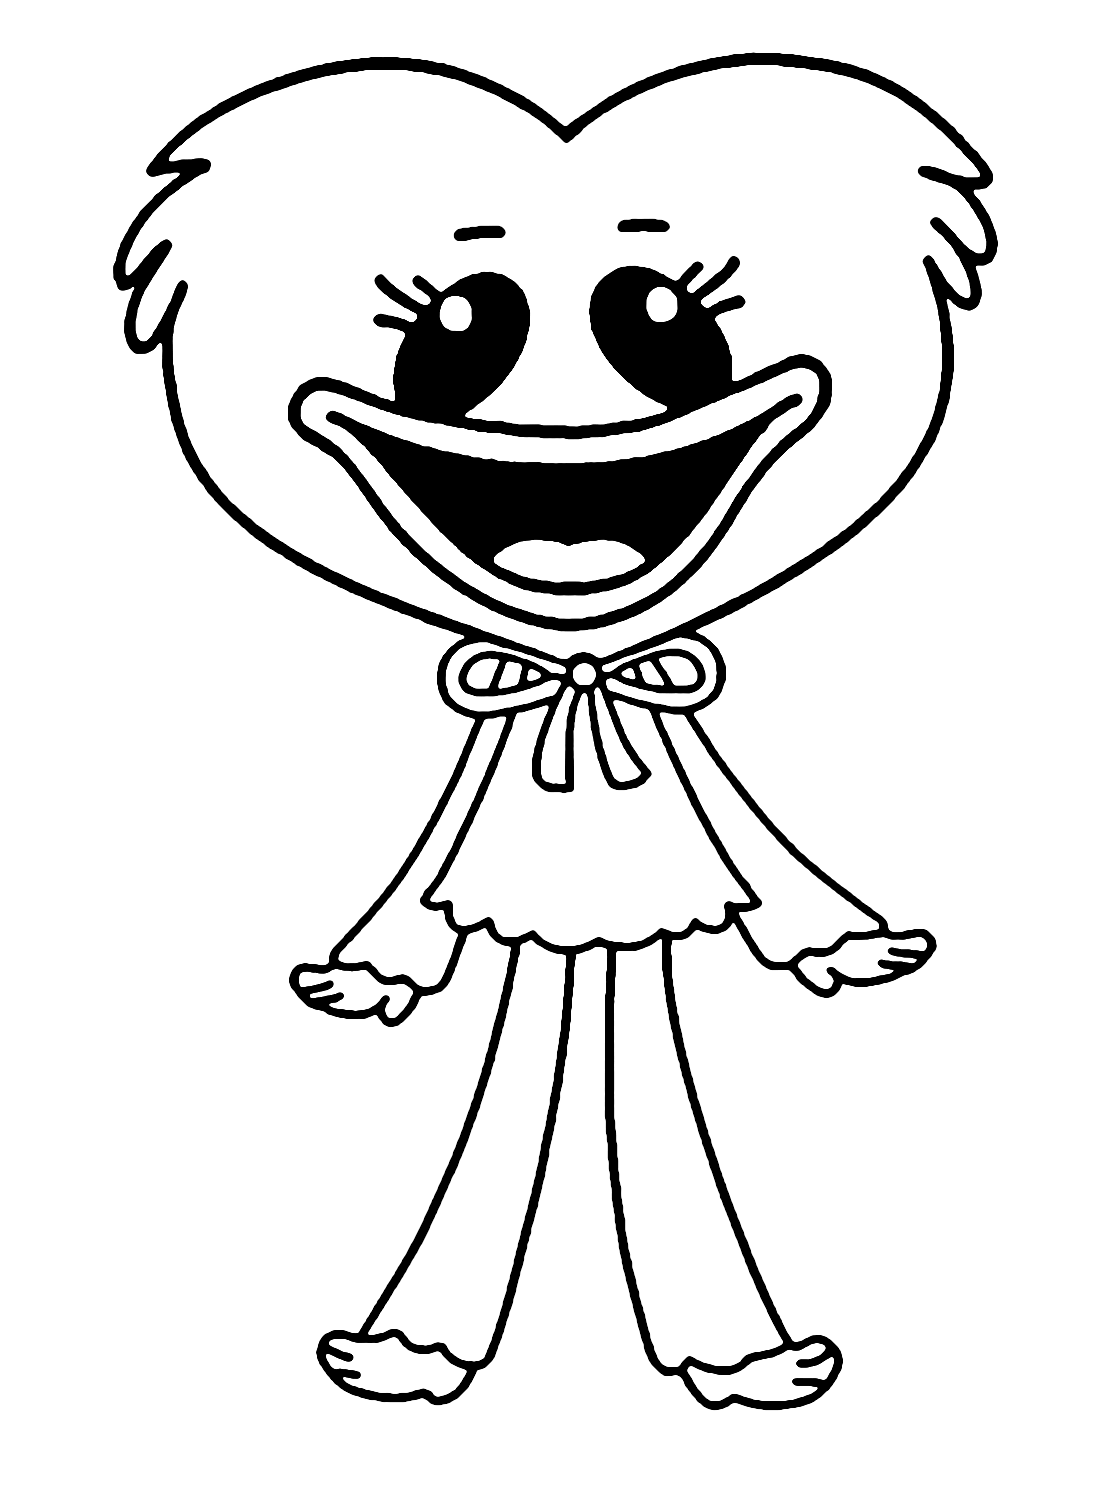 Happy Kissy Missy Coloring Page